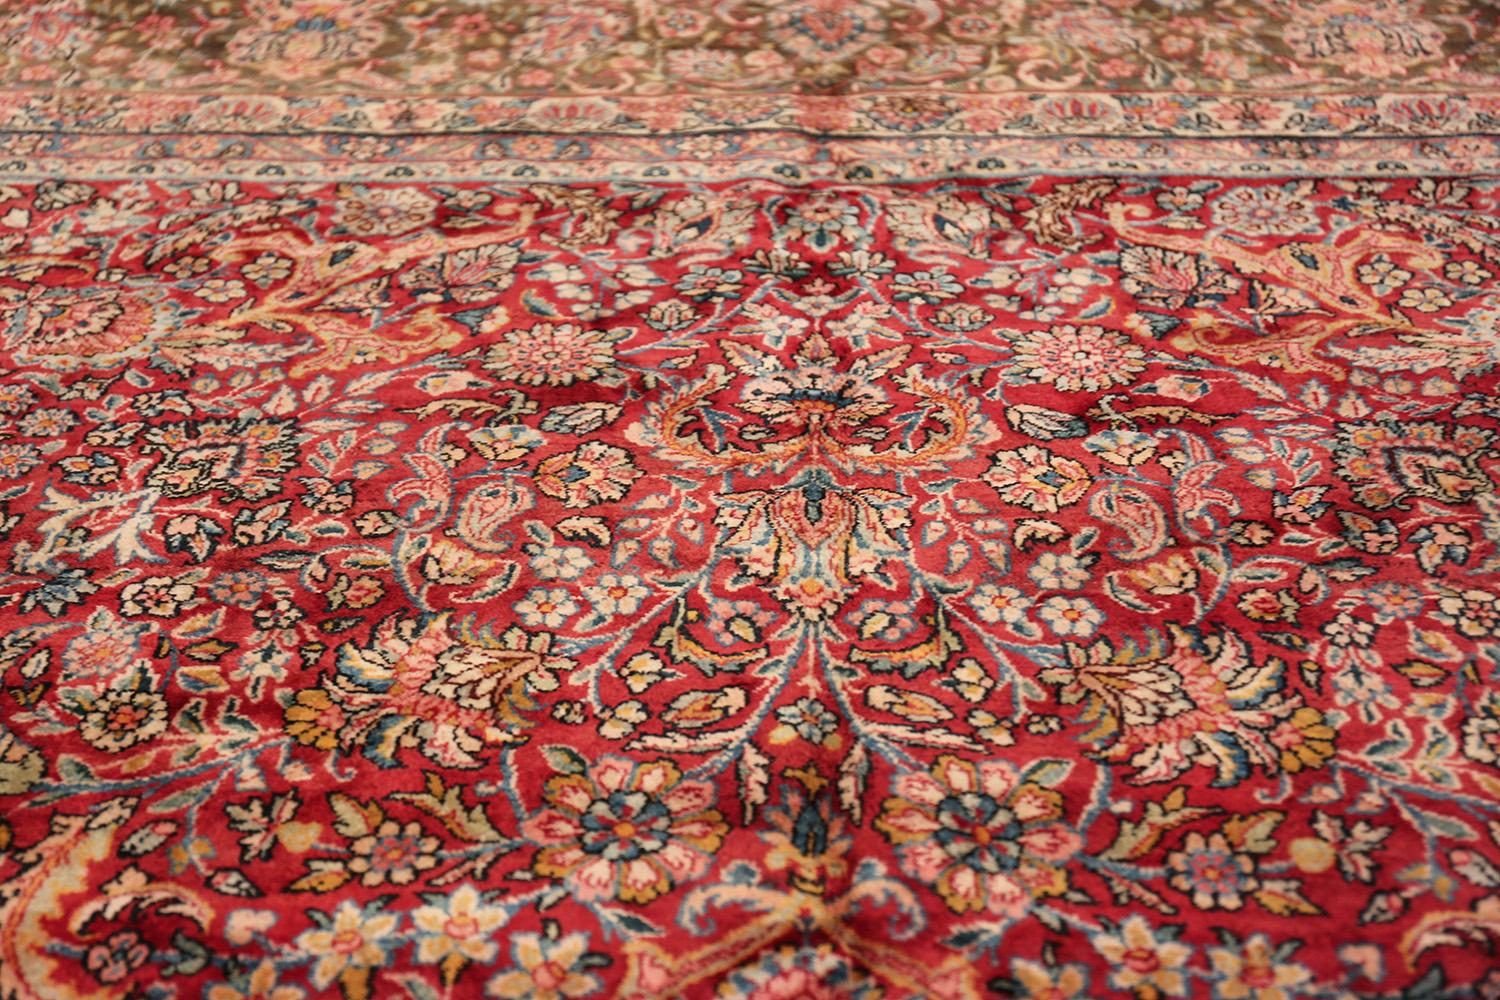 Hand-Knotted Antique Kerman Persian Rug. Size: 9 ft 9 in x 17 ft 3 in (2.97 m x 5.26 m)